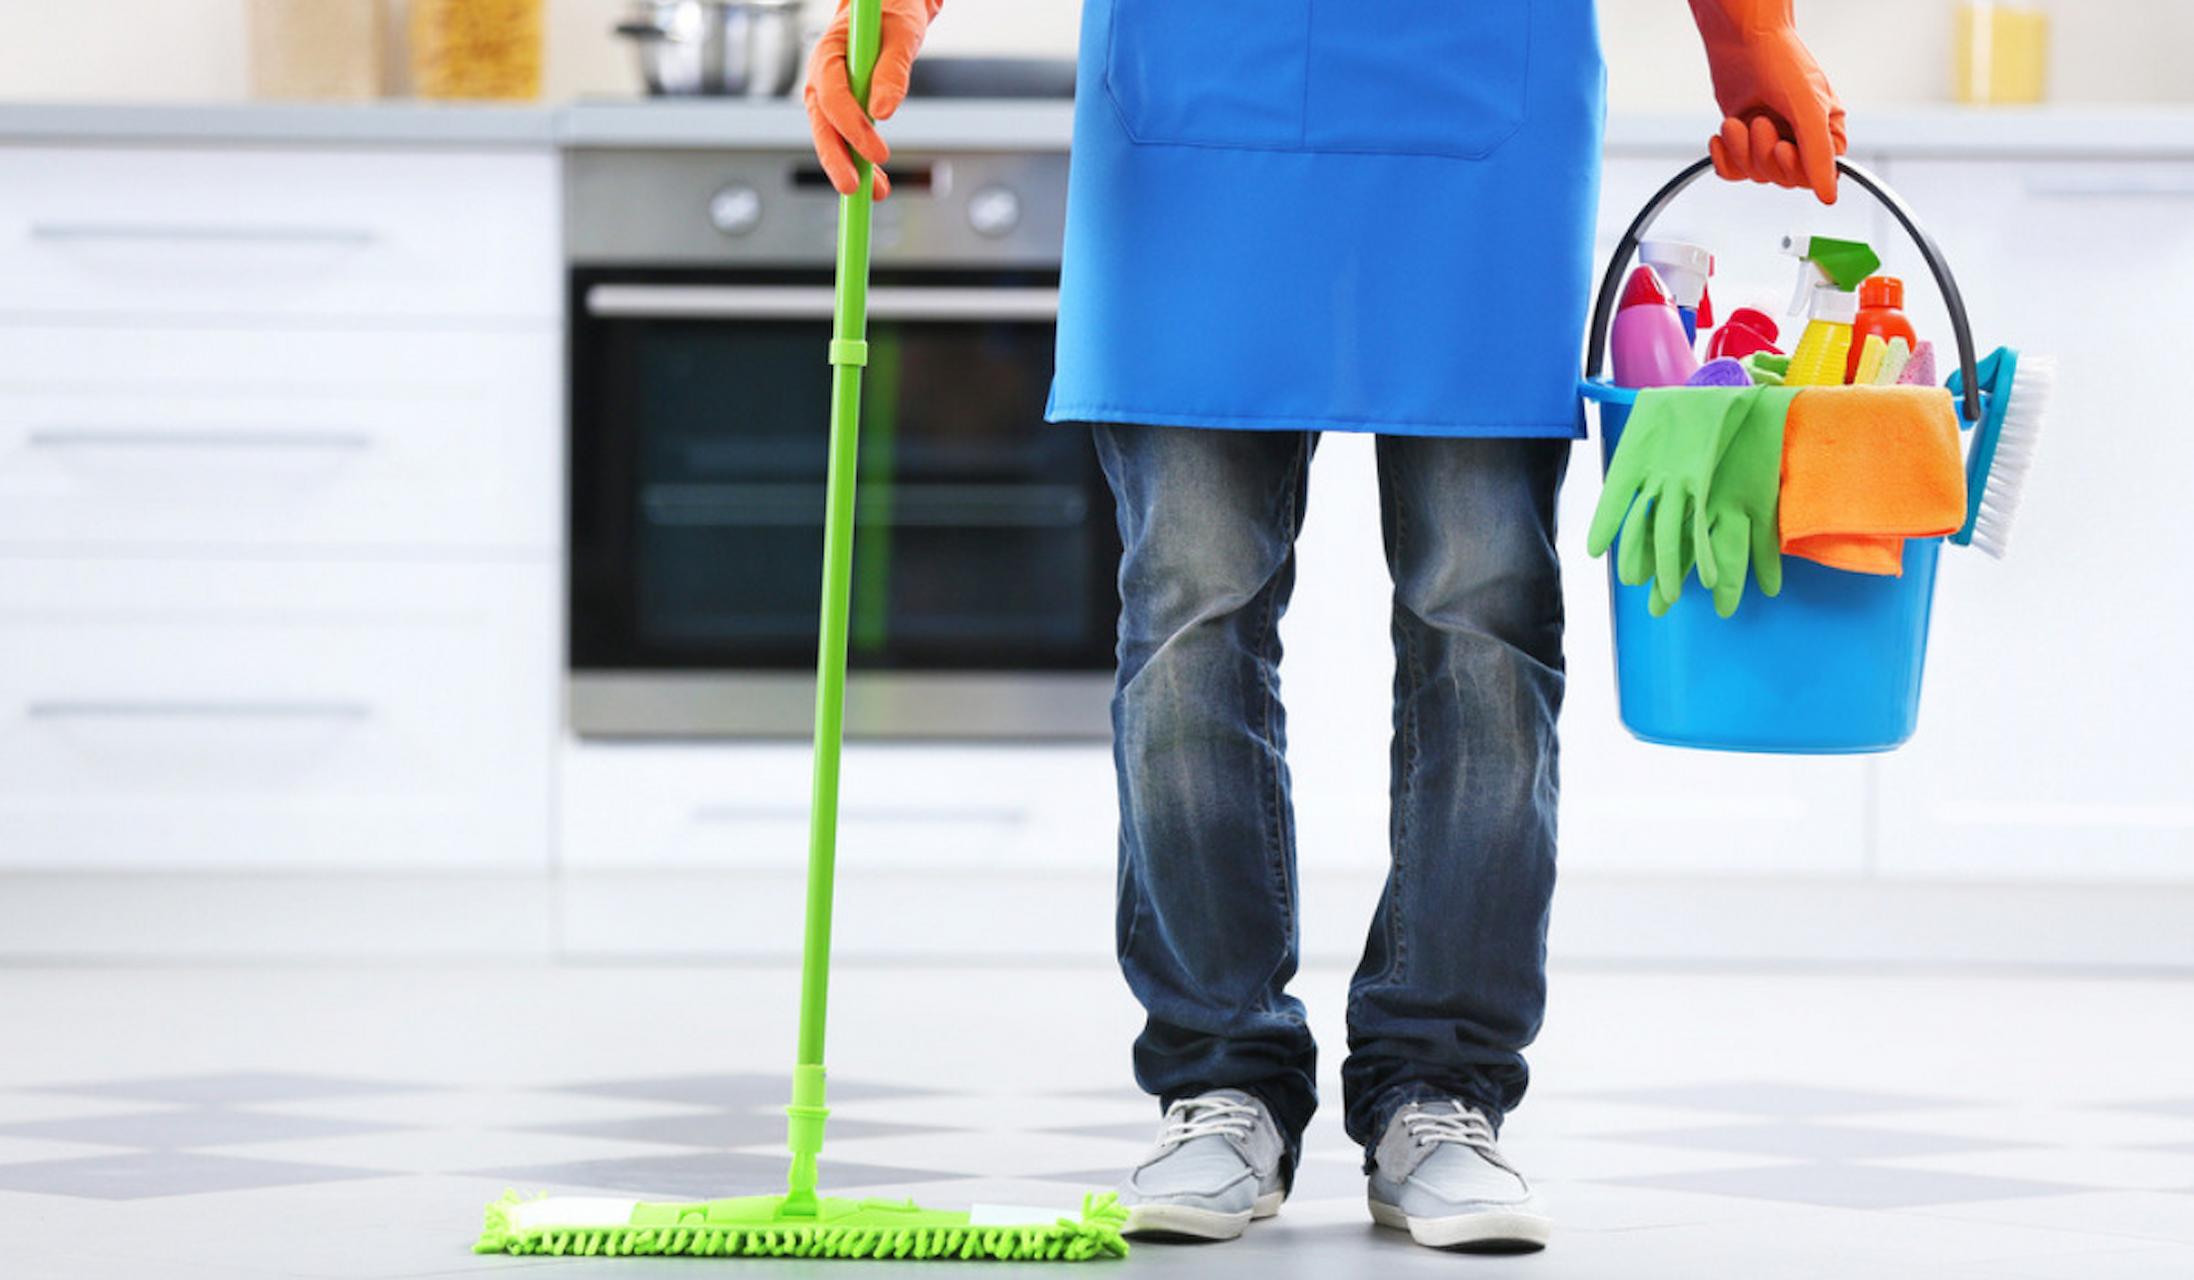 How To Find And Hire The Best Domestic Staff For Your Needs?